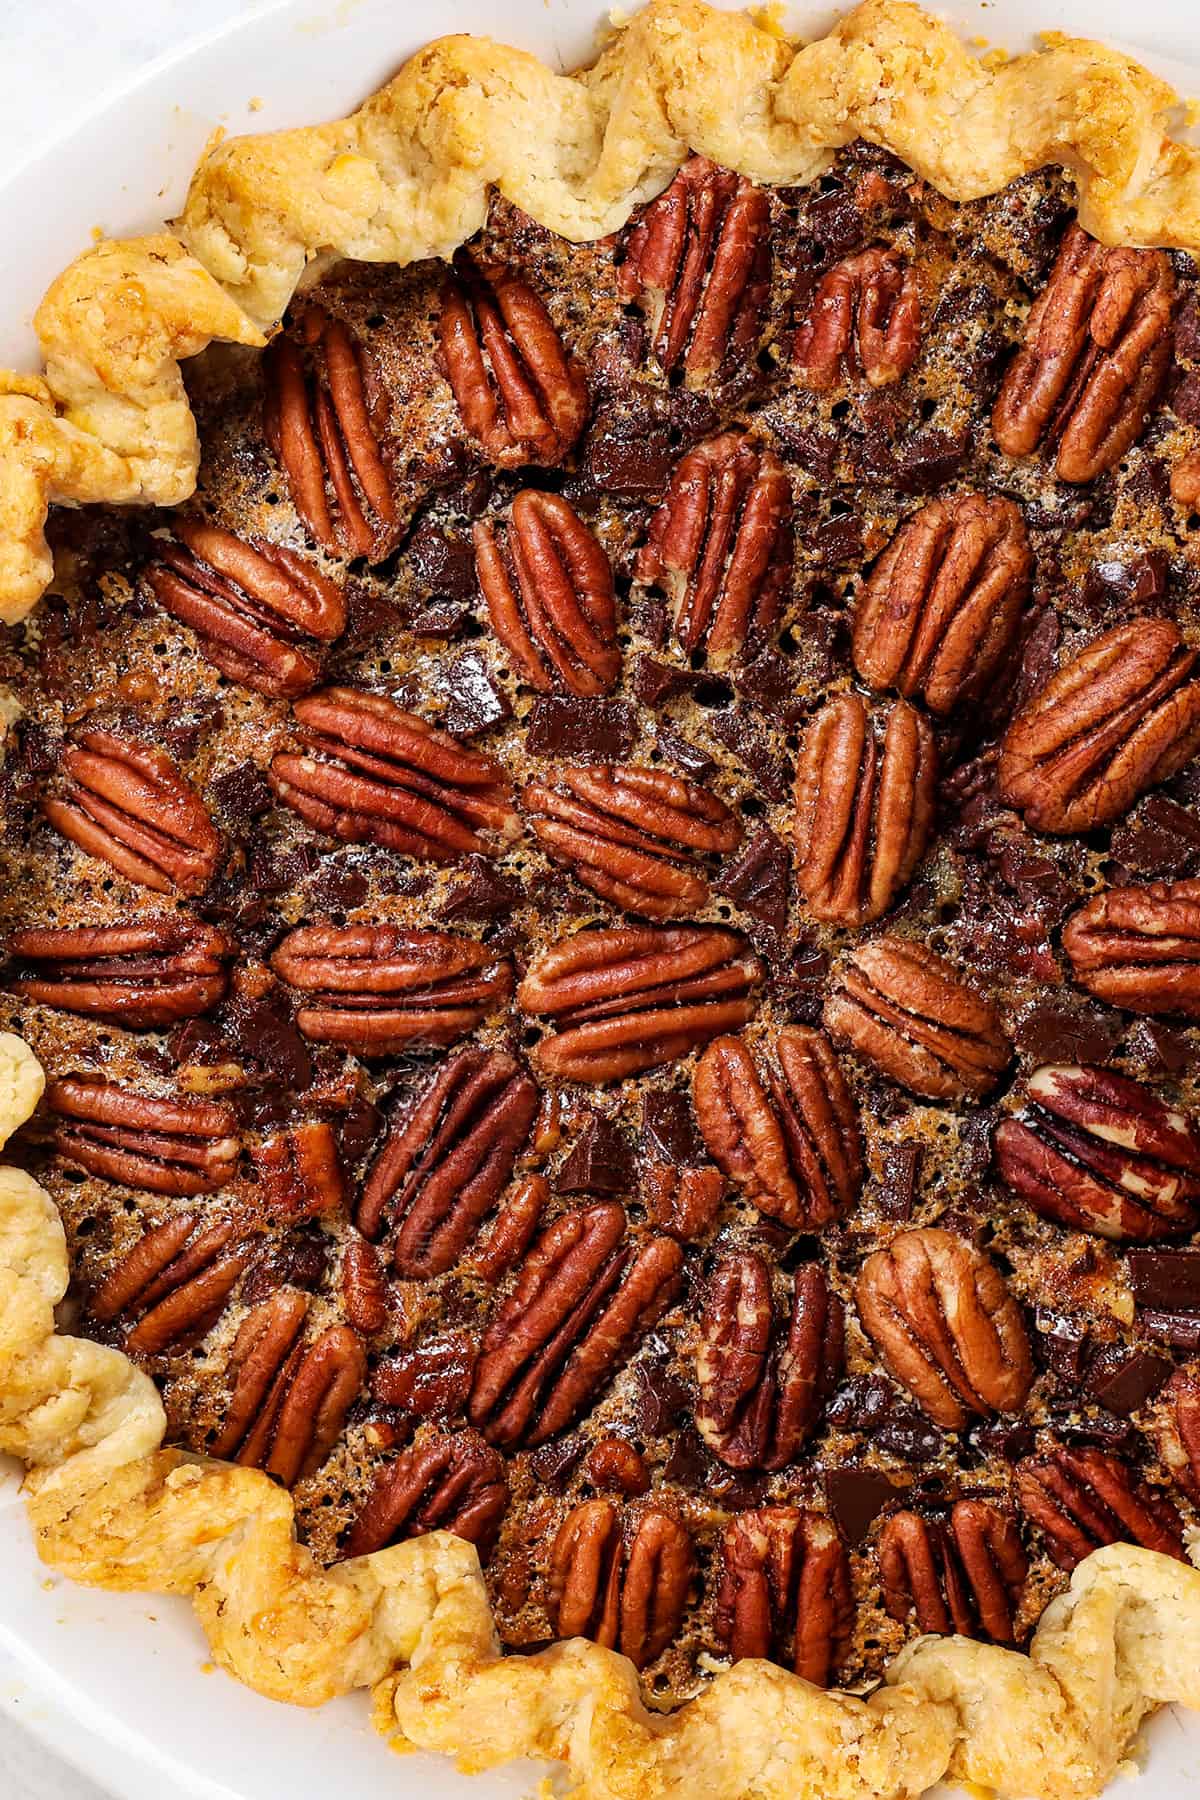 top view of chocolate pecan pie showing the decorative pattern of pecans on top